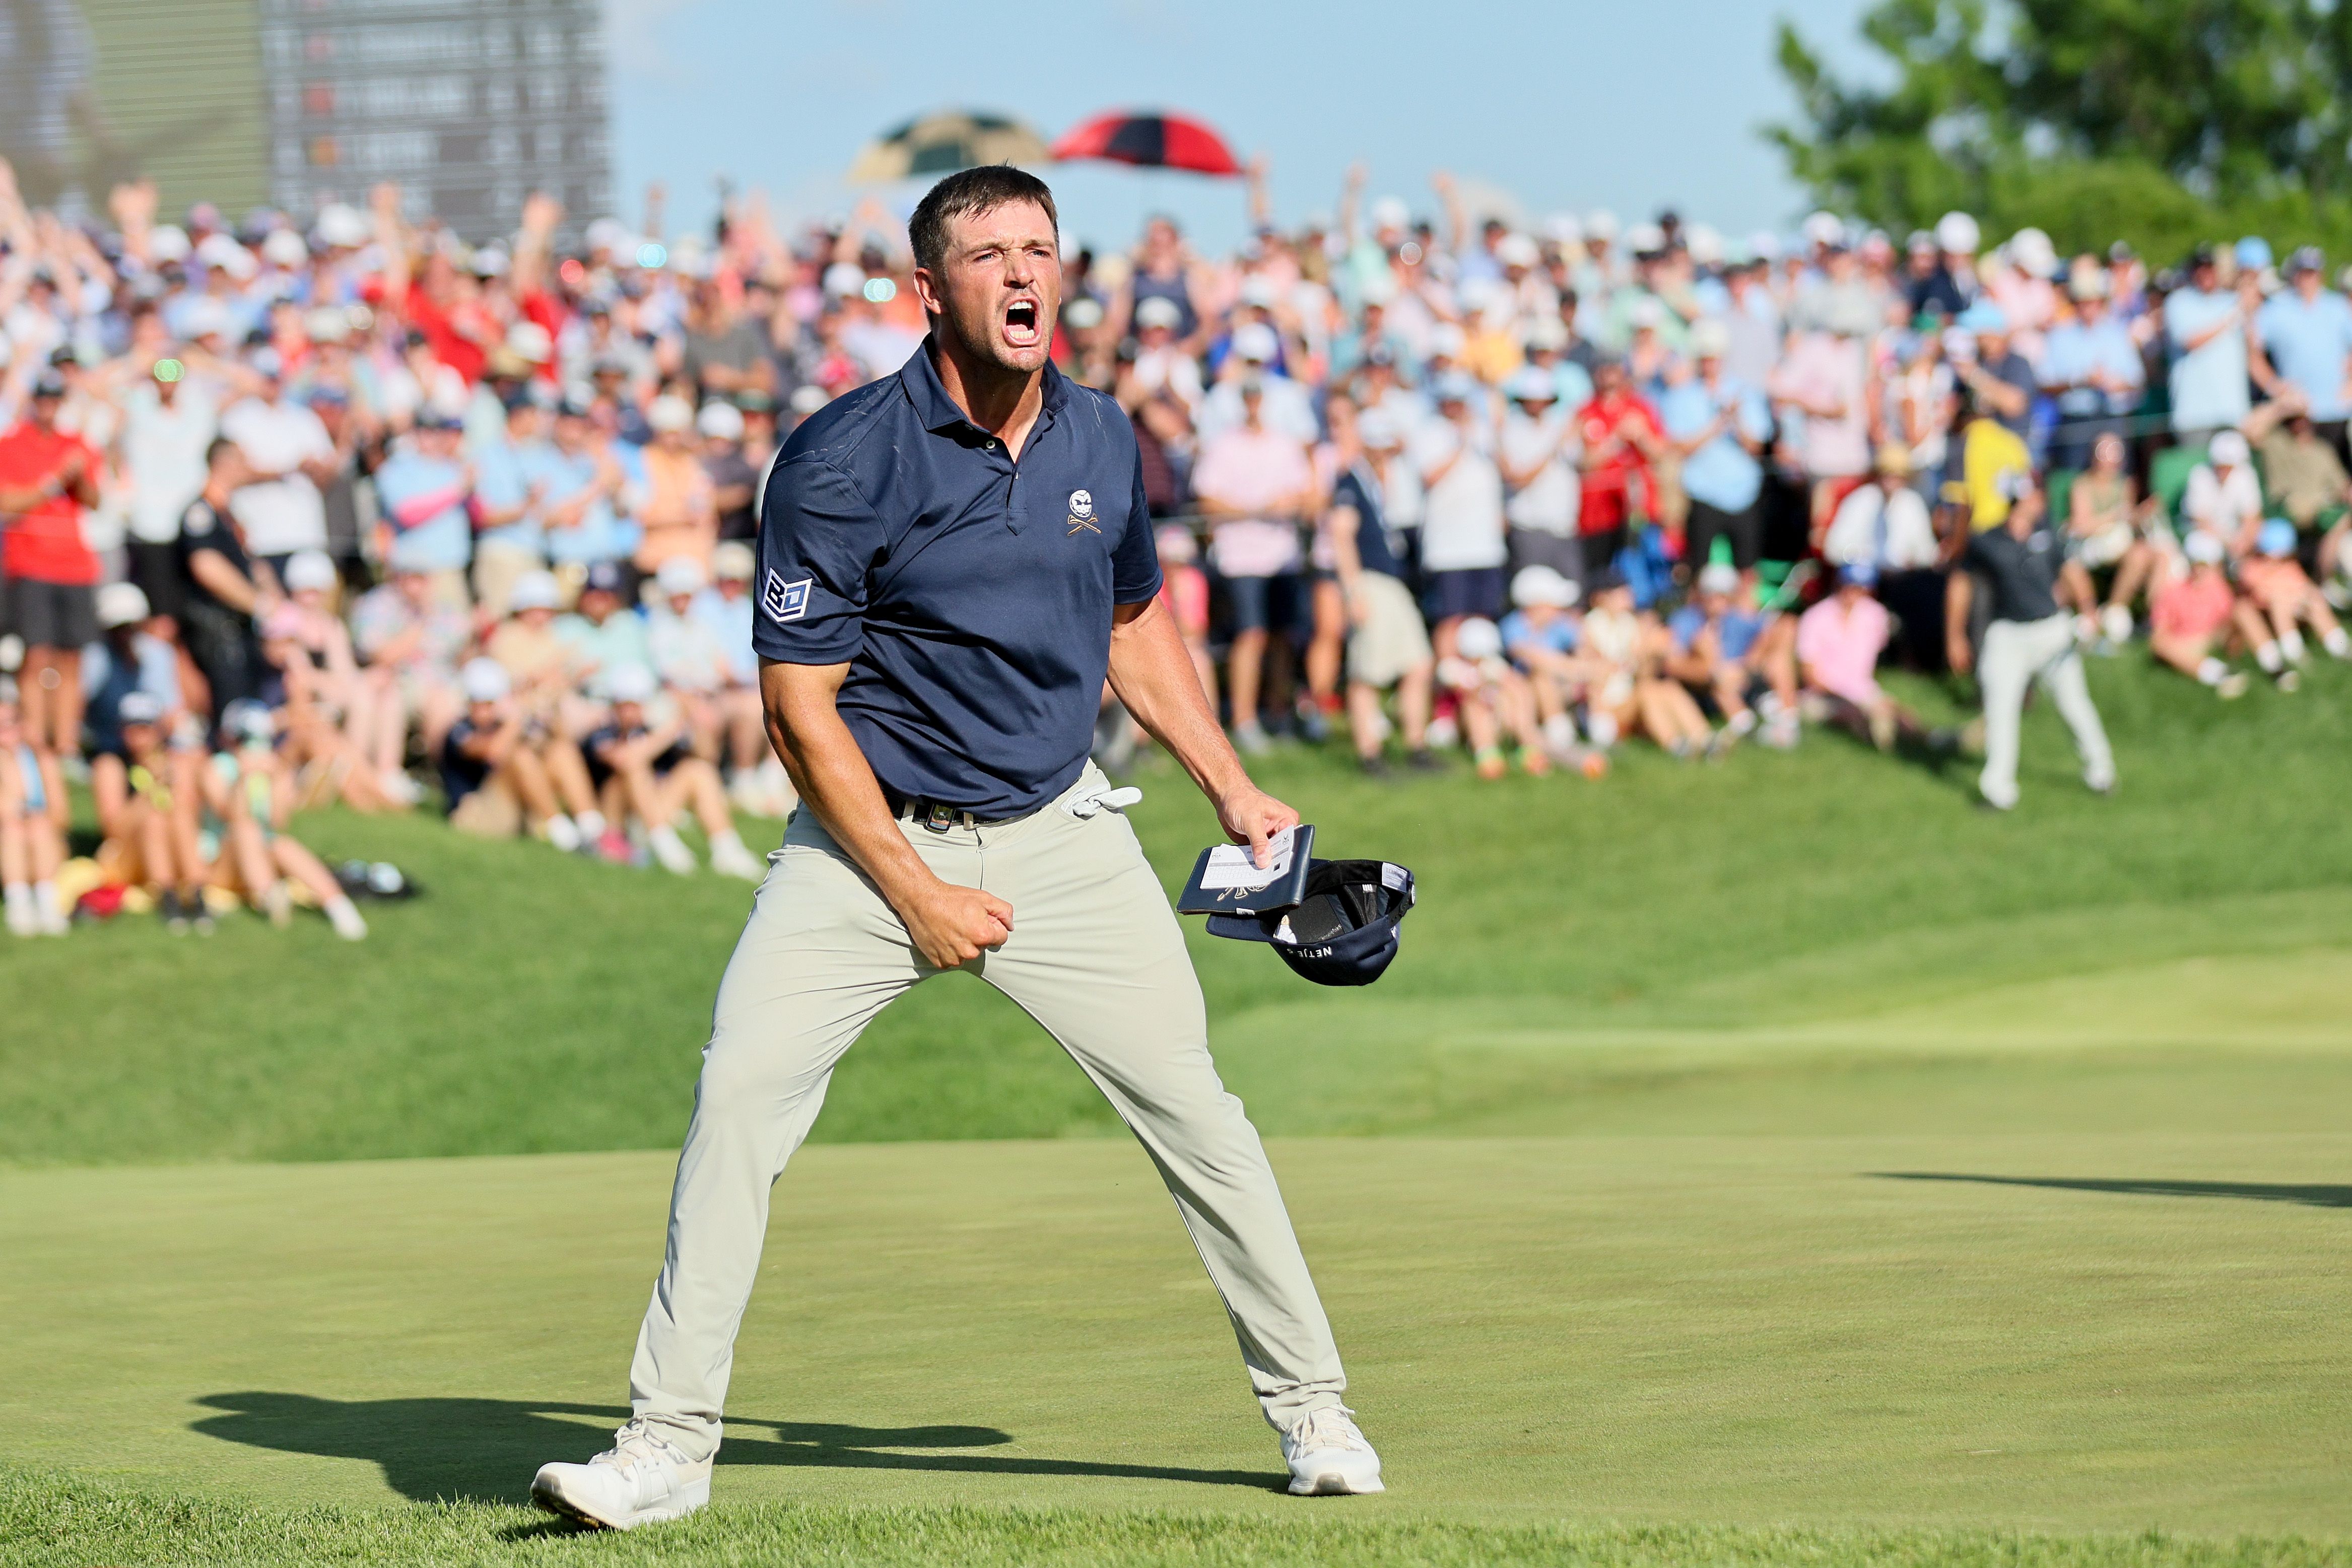 Bryson DeChambeau after making birdie at the final hole of the PGA Championship. (Andy Lyons/Getty Images)